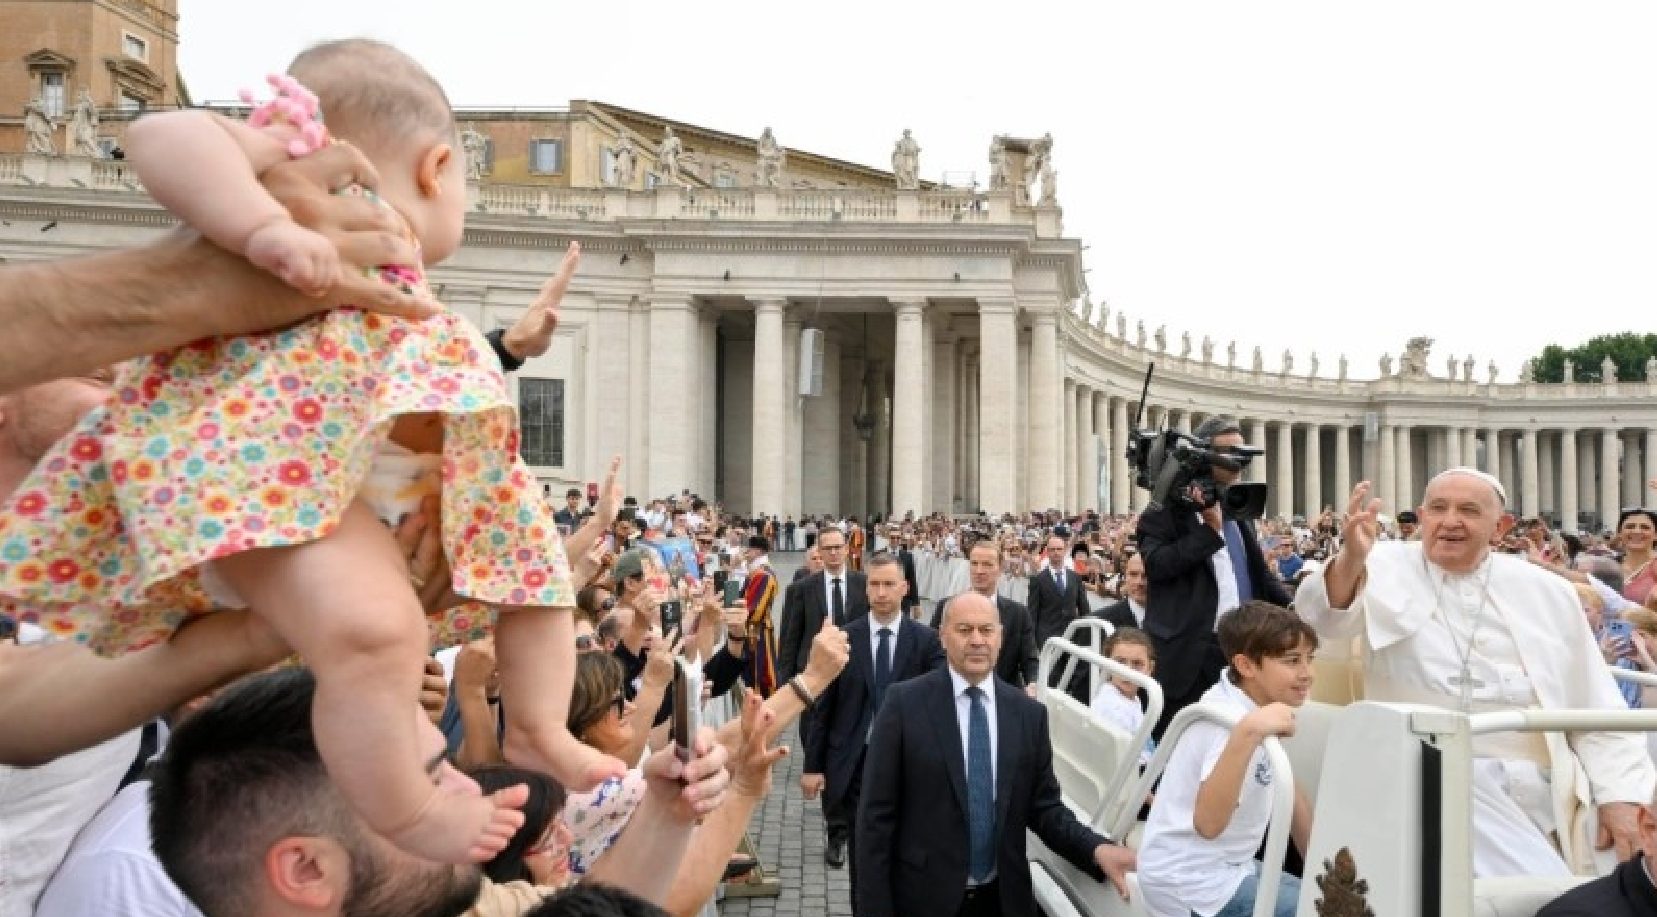 After the ride in the popemobile, he began with the traditional catechesis